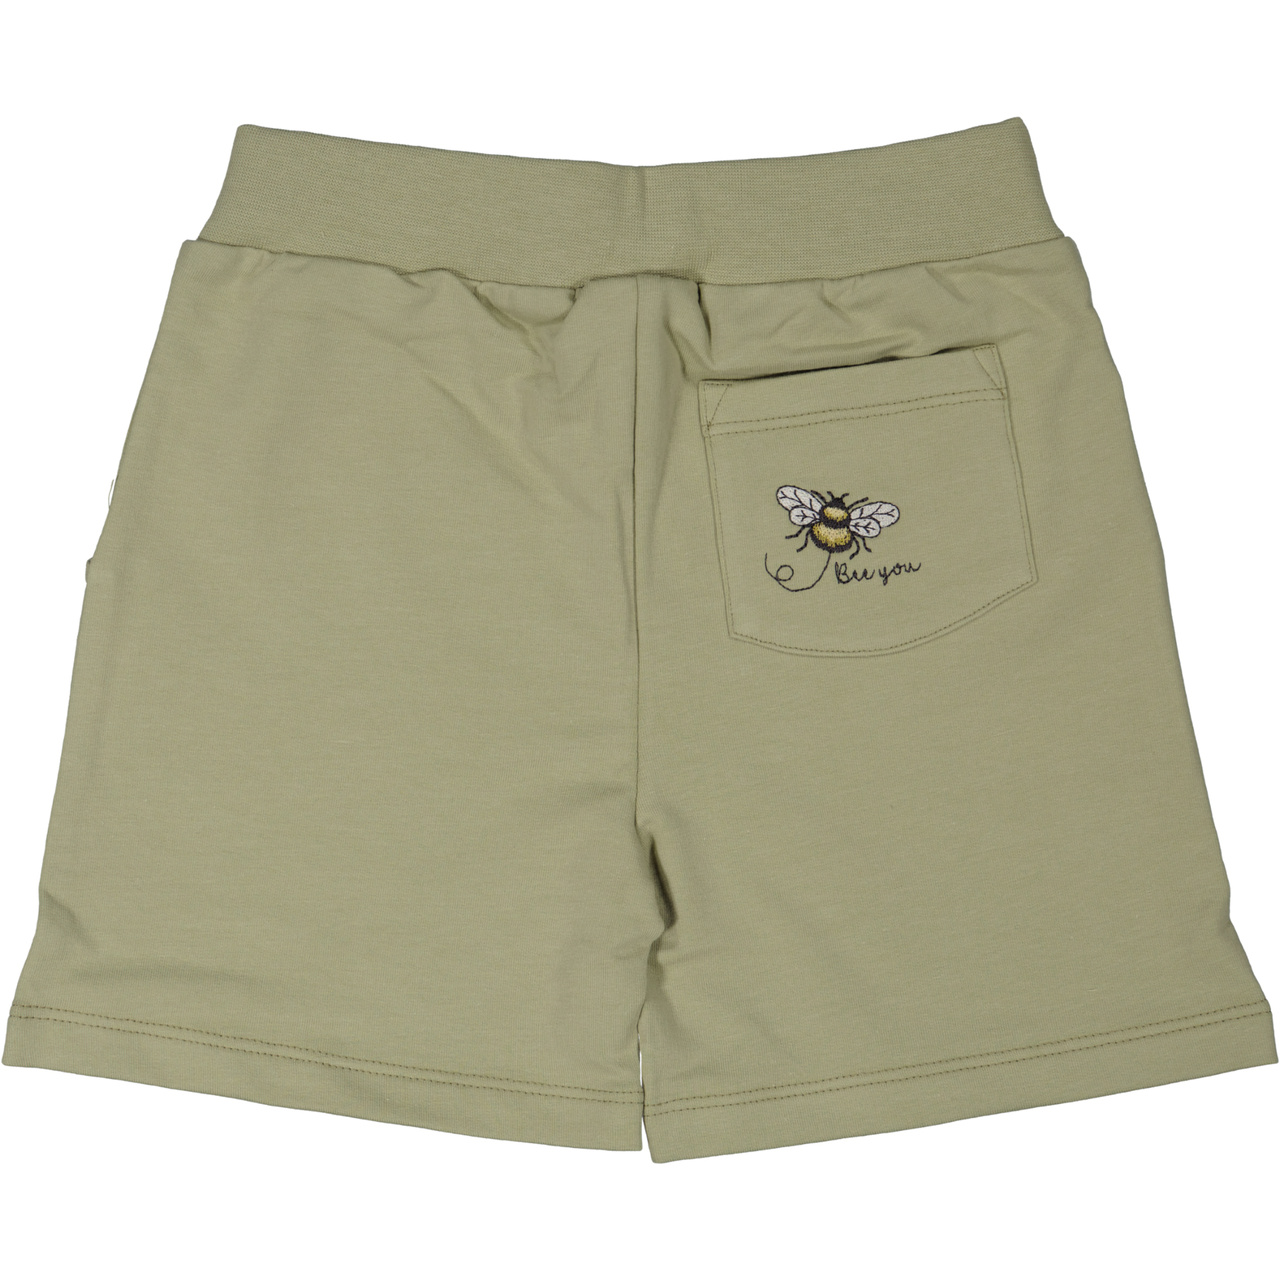 College shorts Olive 122/128